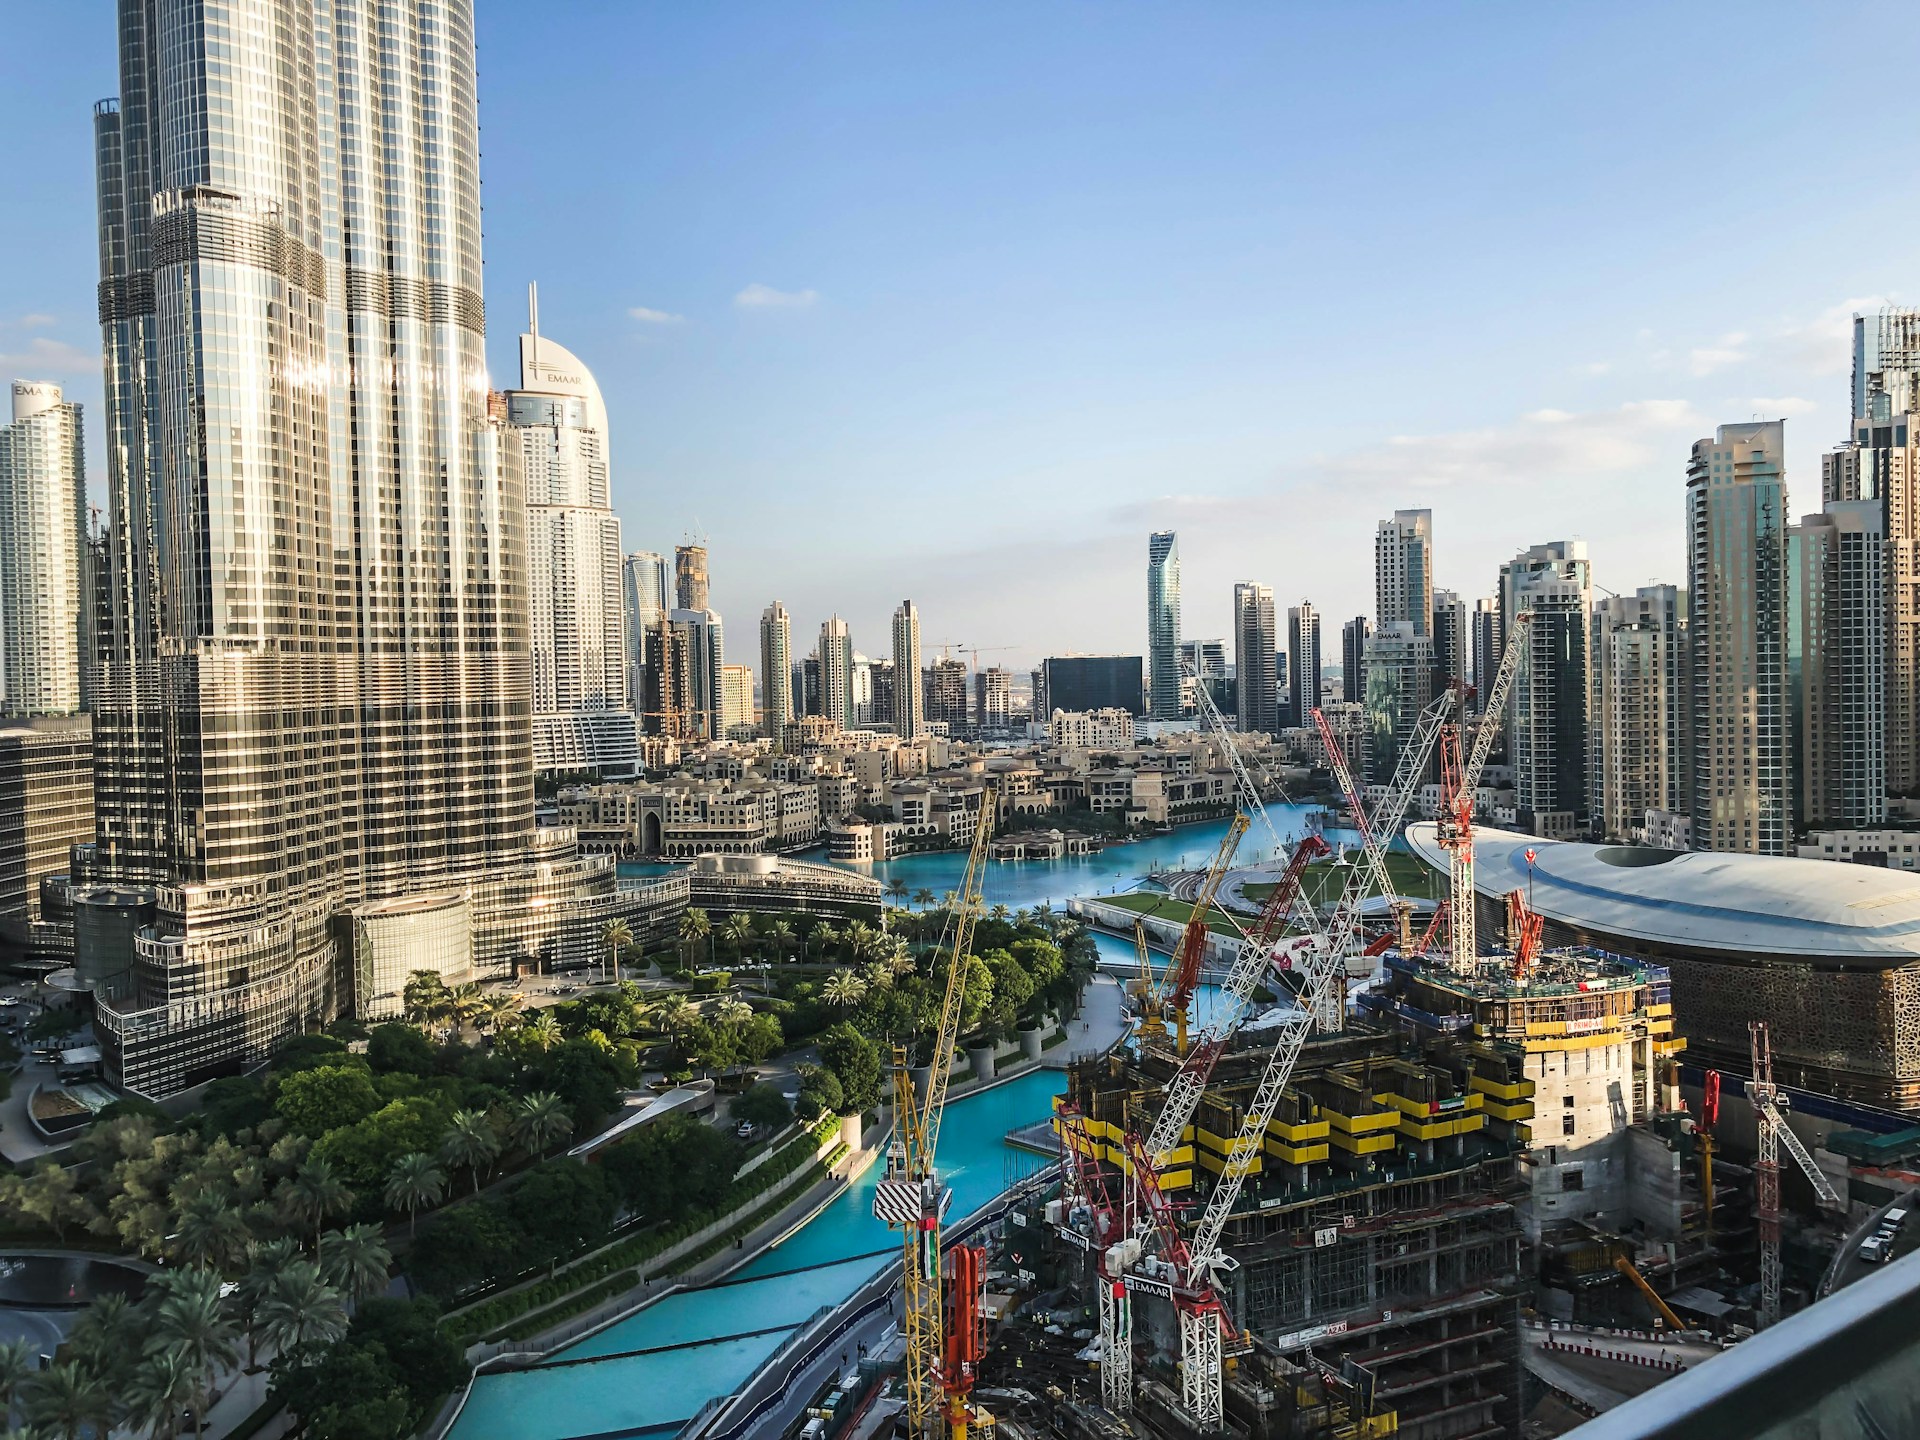 a view of past Dubai megaprojects, including the Burj Khalifa